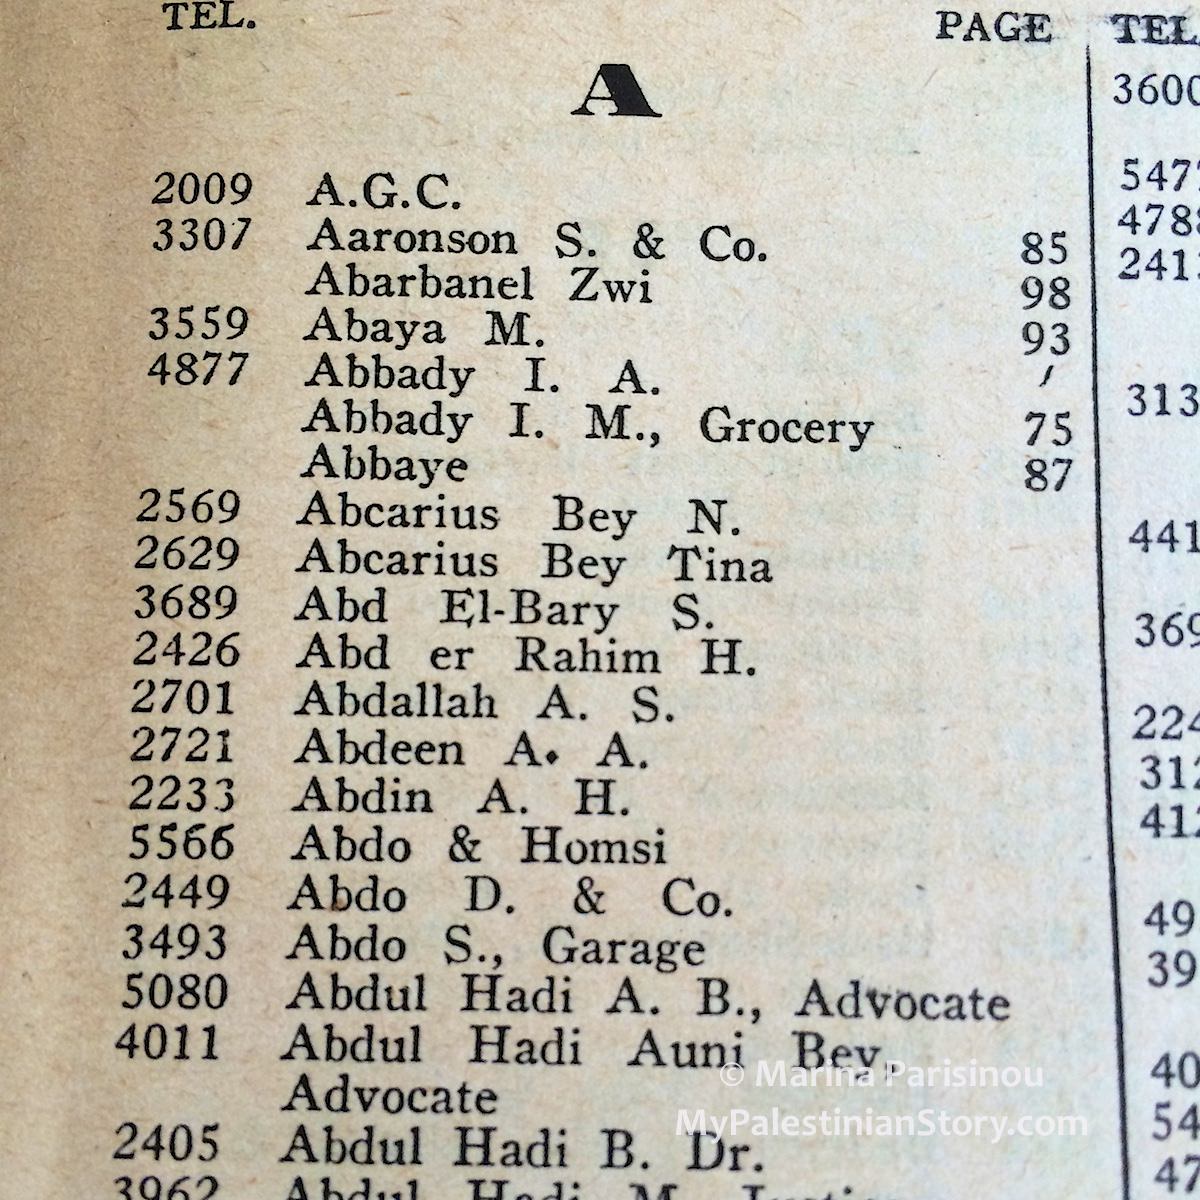 From the 1947-48 Palestine phone book